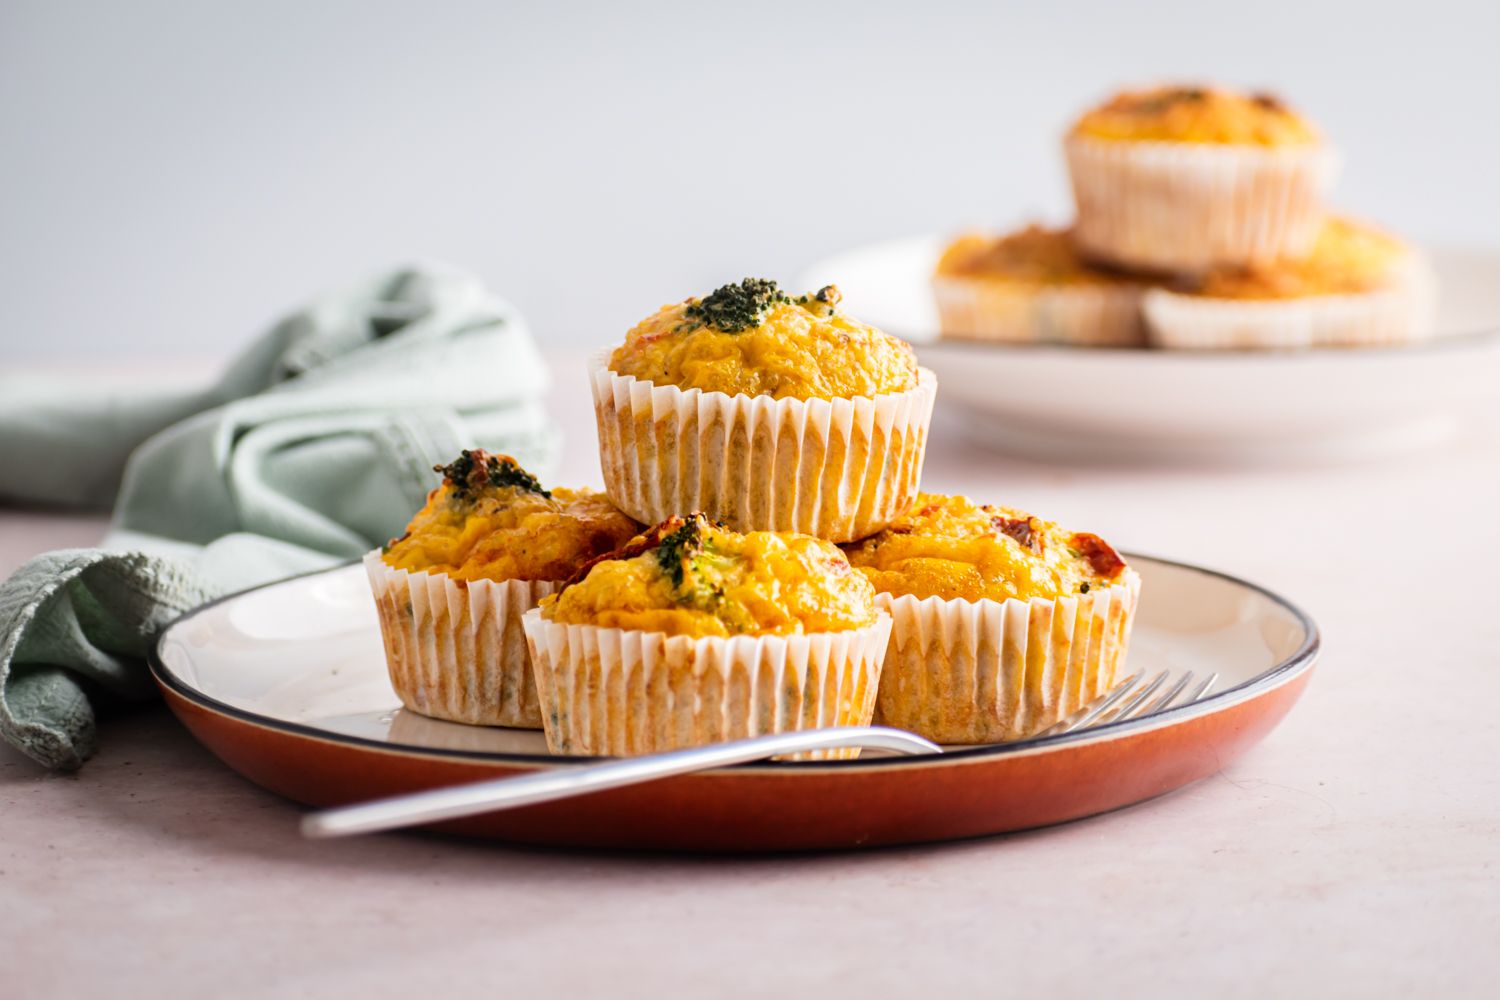 Baked quinoa and egg muffins cooked in a muffin tin with sundried tomatoes, cheese, and broccoli.